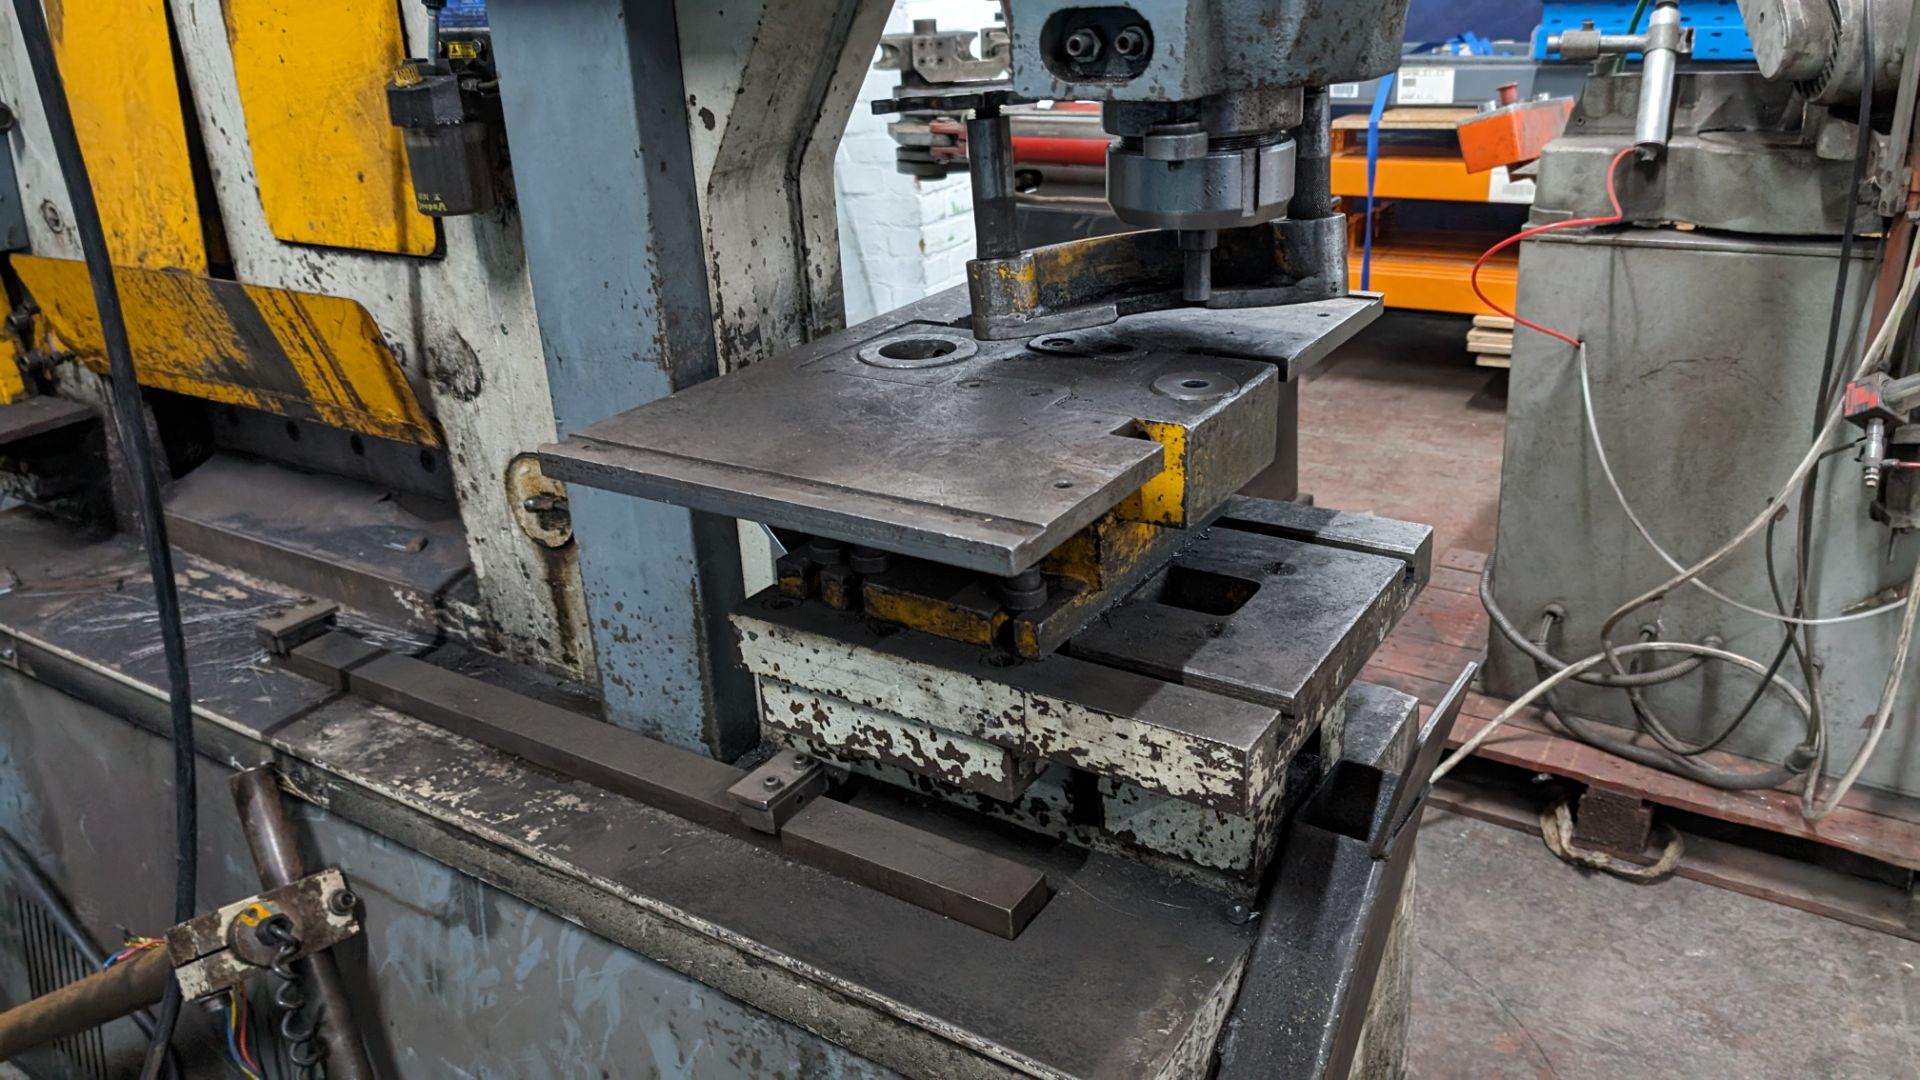 Kingsland multi 125 hydraulic metalworker, serial number 473906. Includes foot pedal plus tooling a - Image 14 of 22